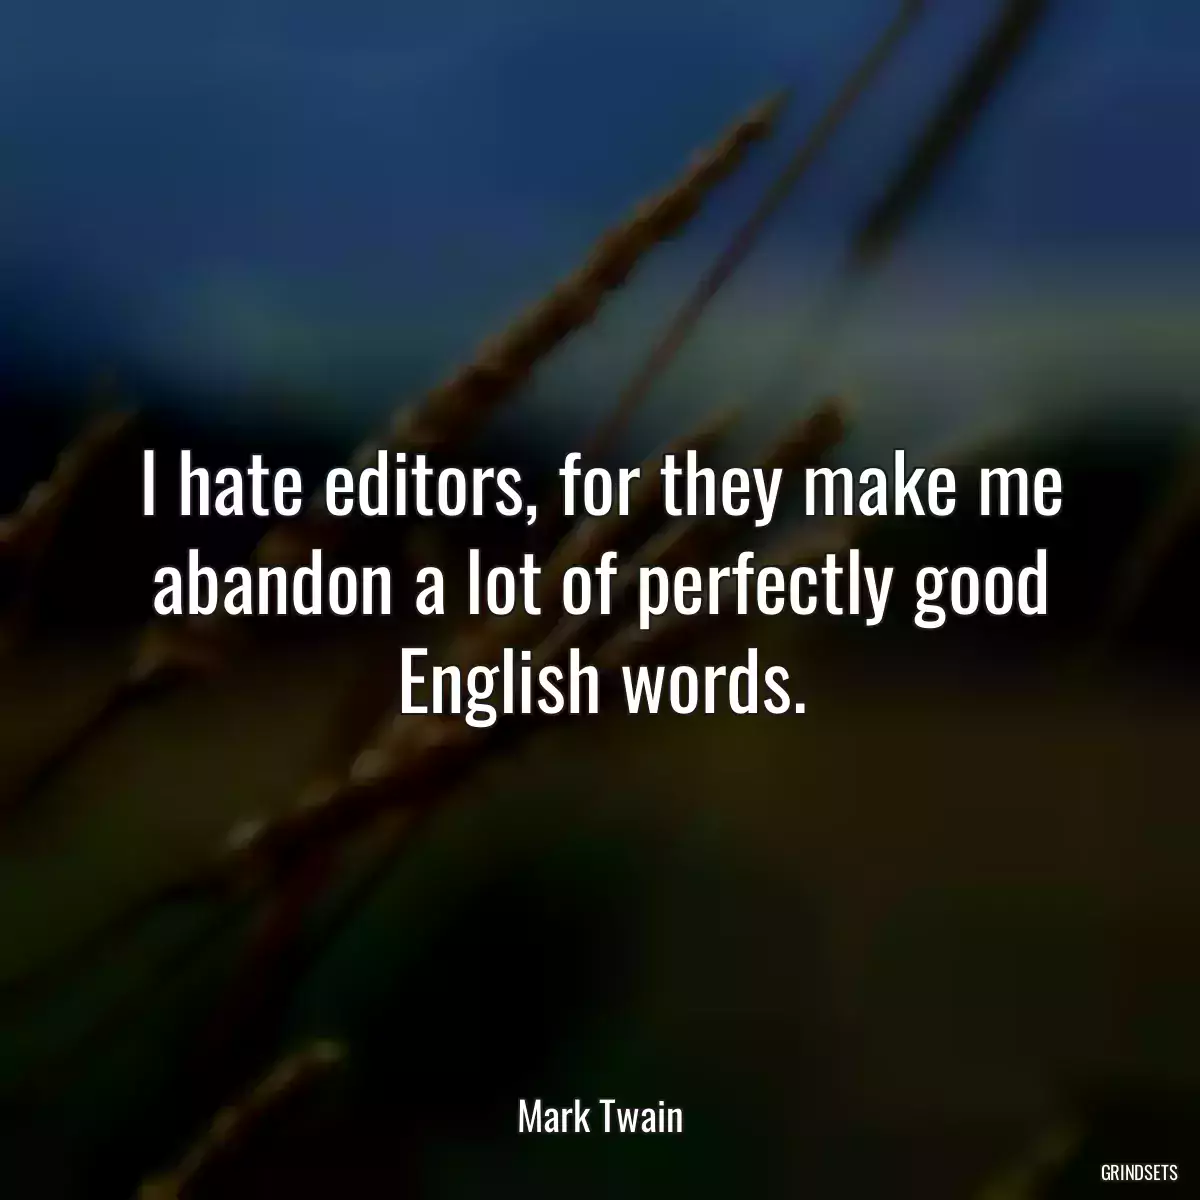 I hate editors, for they make me abandon a lot of perfectly good English words.